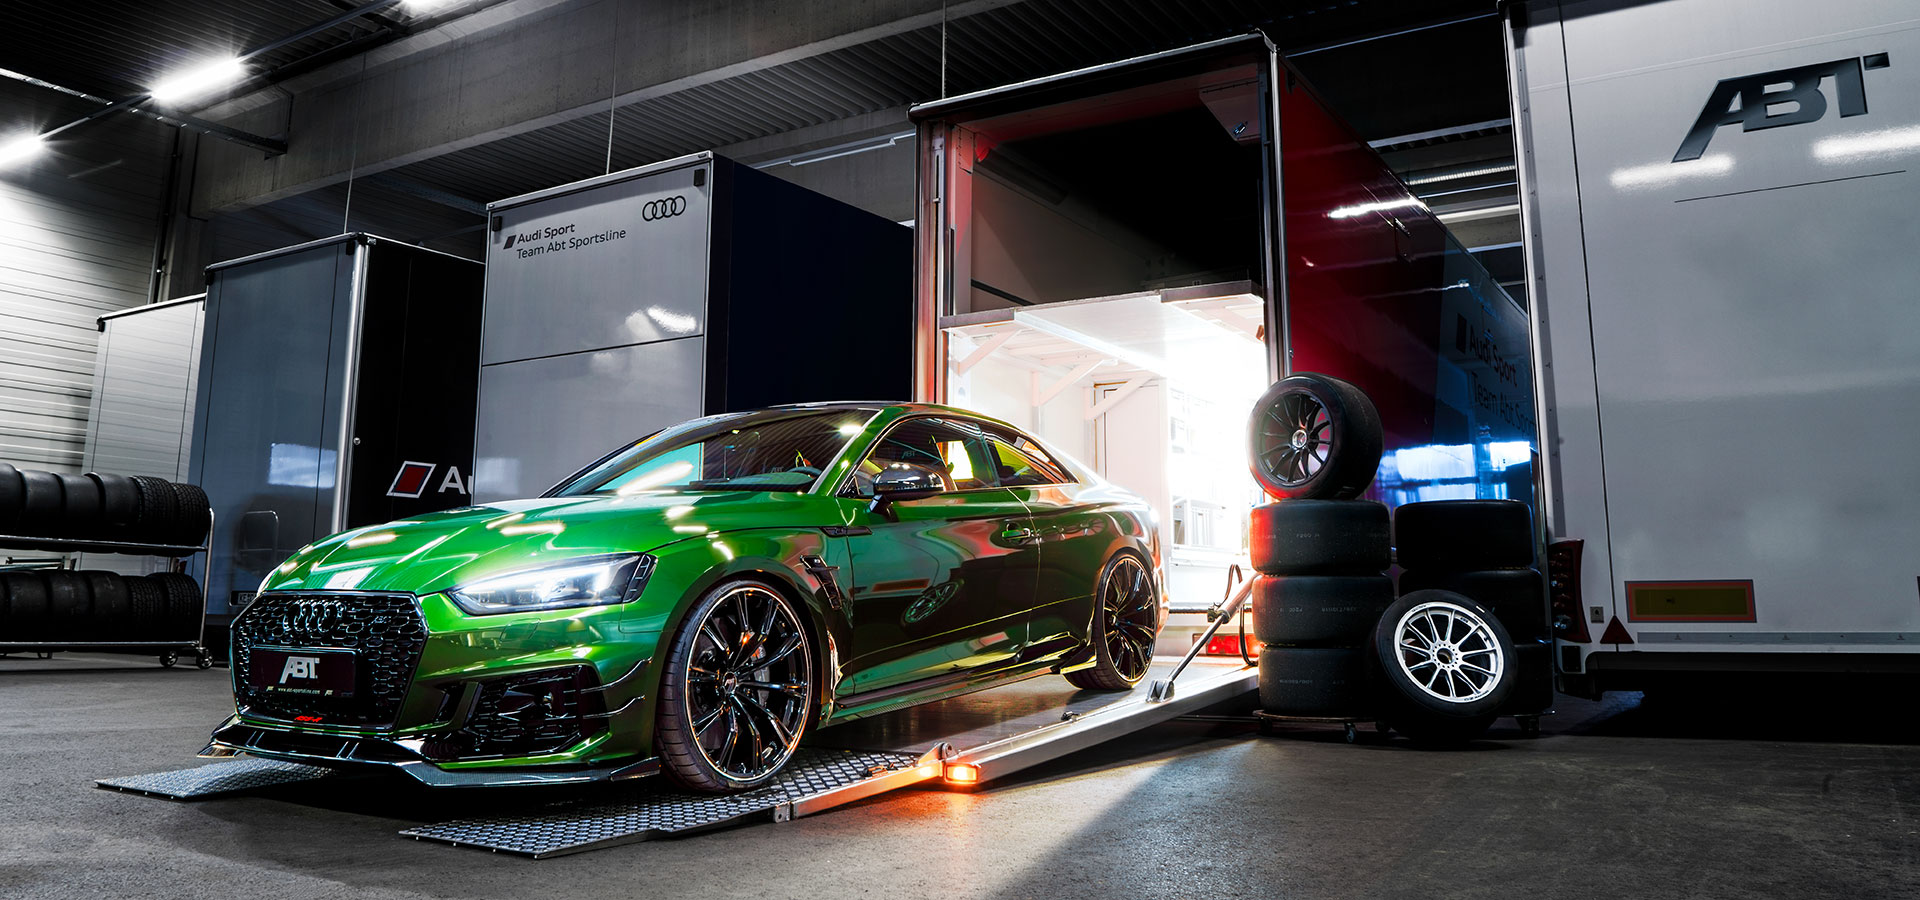 ABT Special Editions - Audi Tuning, VW Tuning, Chiptuning von ABT Sportsline .